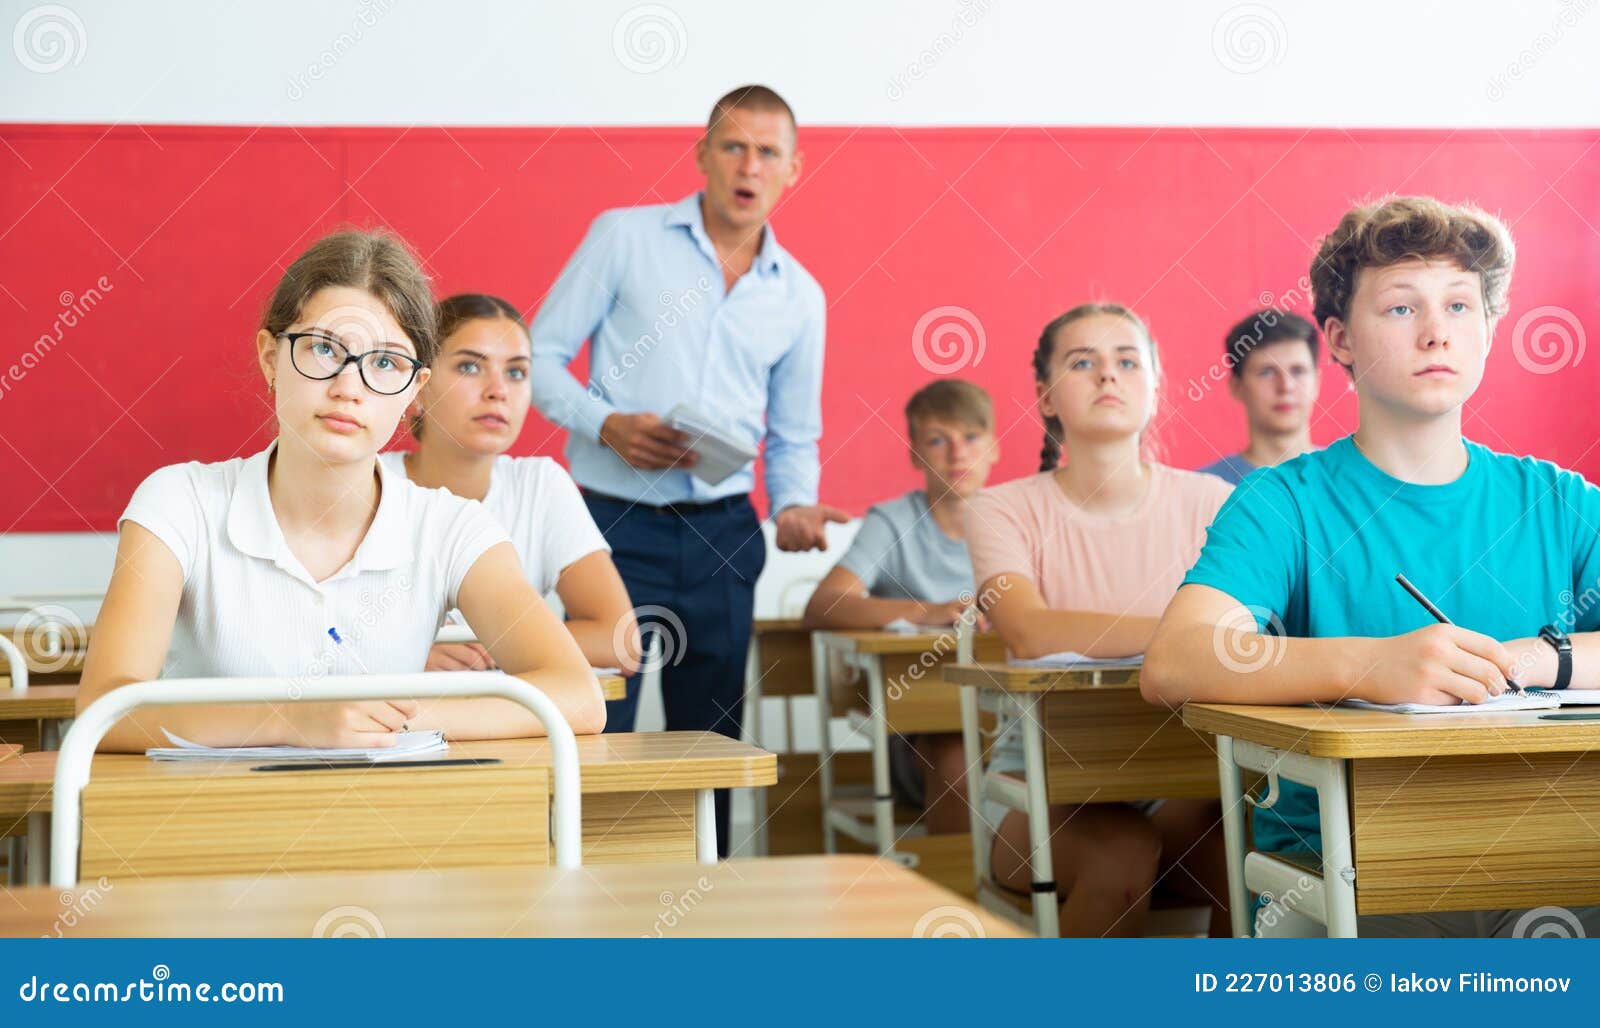 Teenage Students are Sitting at Their Desks in Classroom. in Background the  Teacher Stock Photo - Image of activity, classroom: 227013806